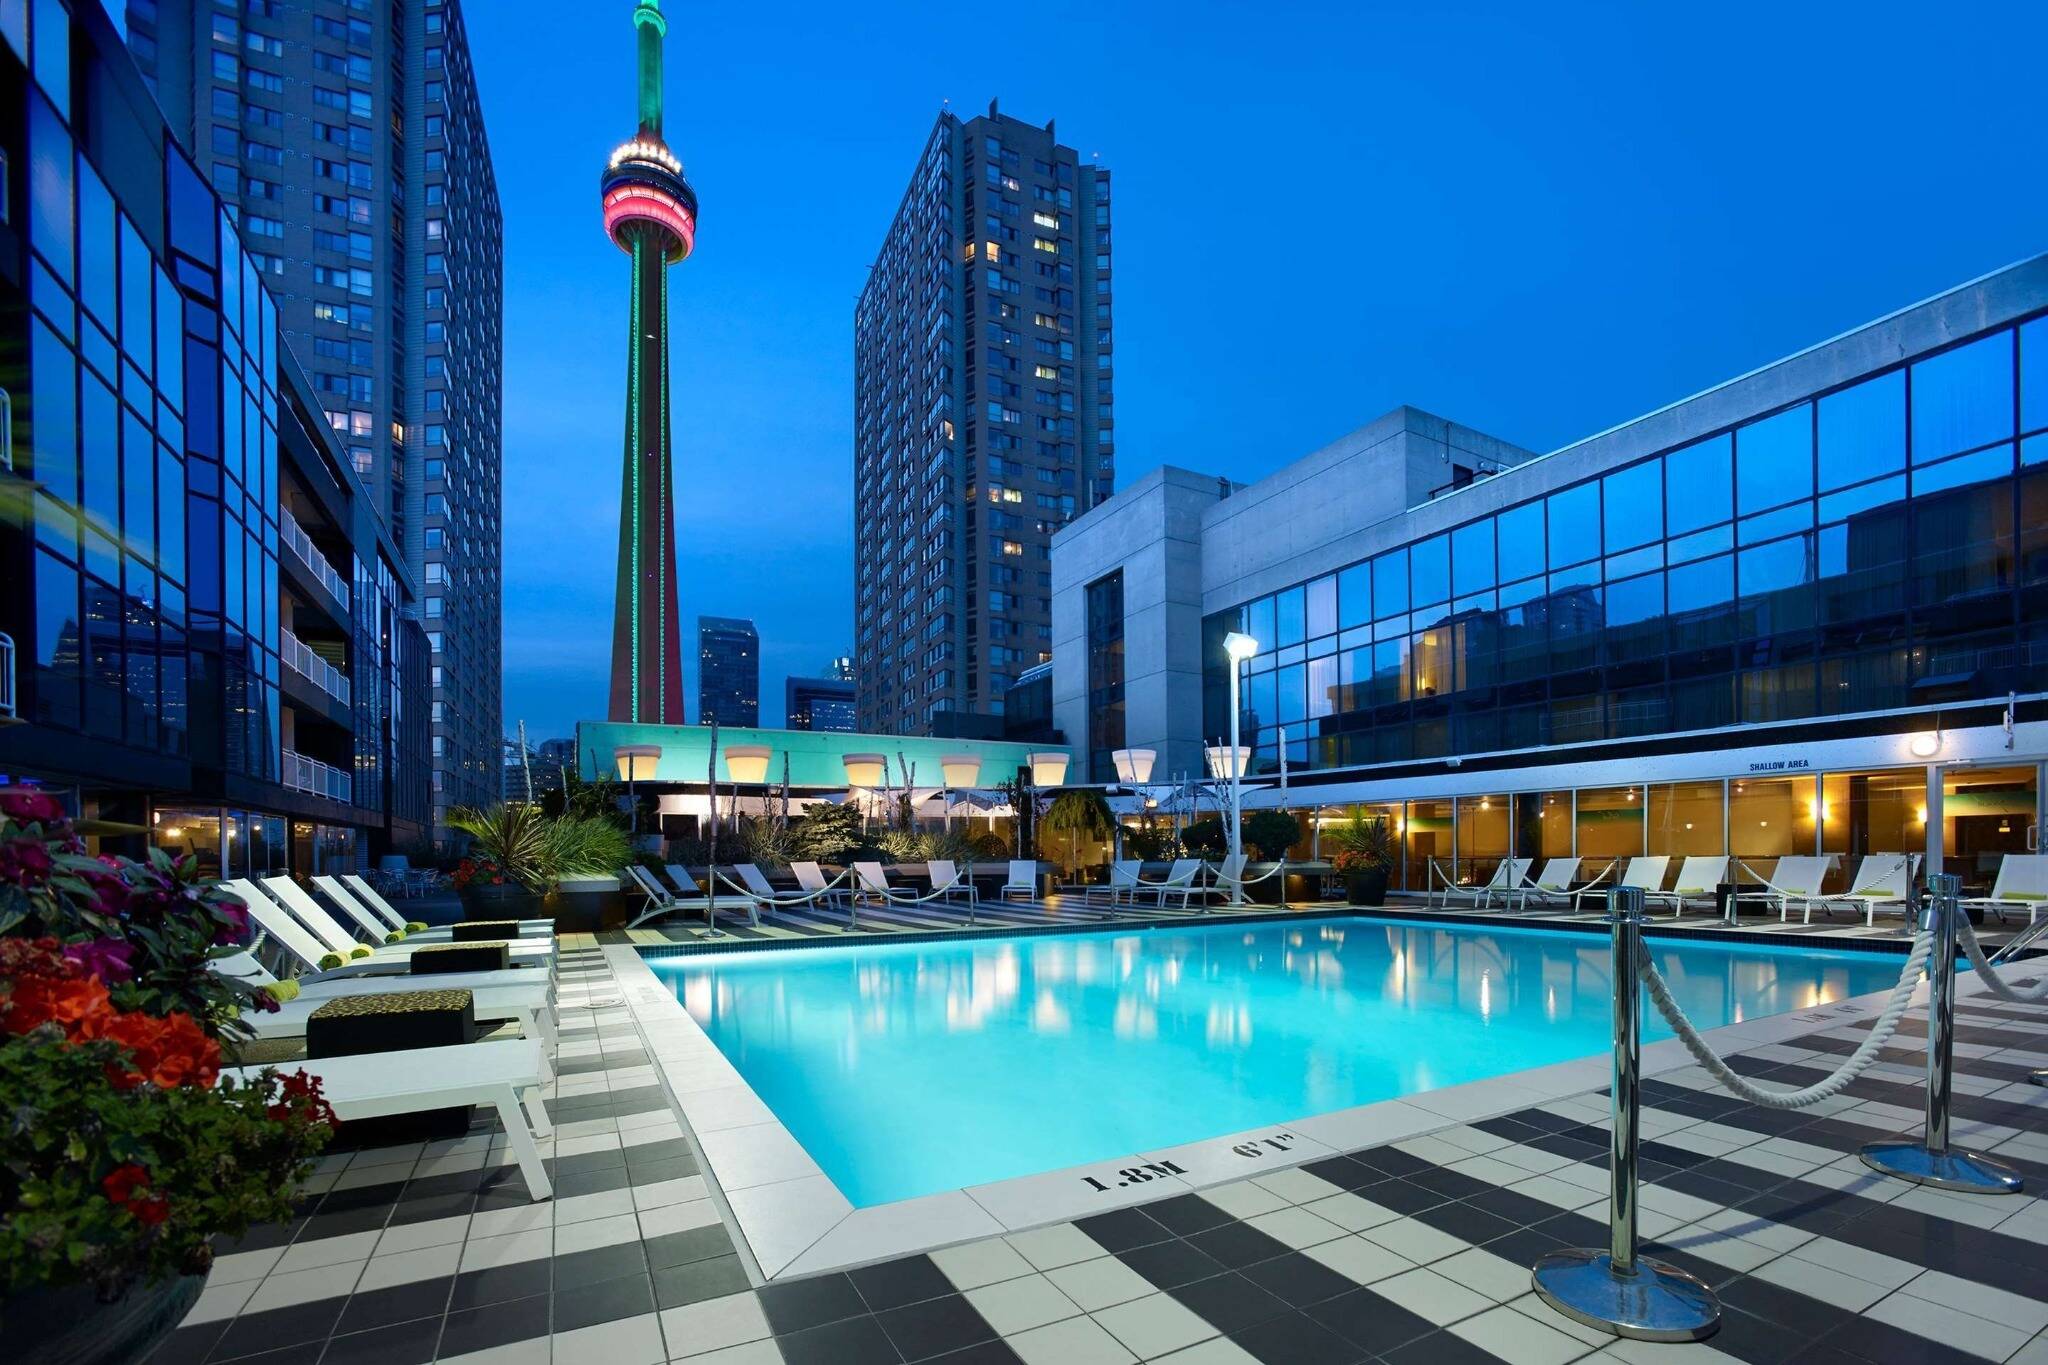 20220530 Rooftop Pool Toronto ?w=2048&cmd=resize Then Crop&height=1365&quality=70